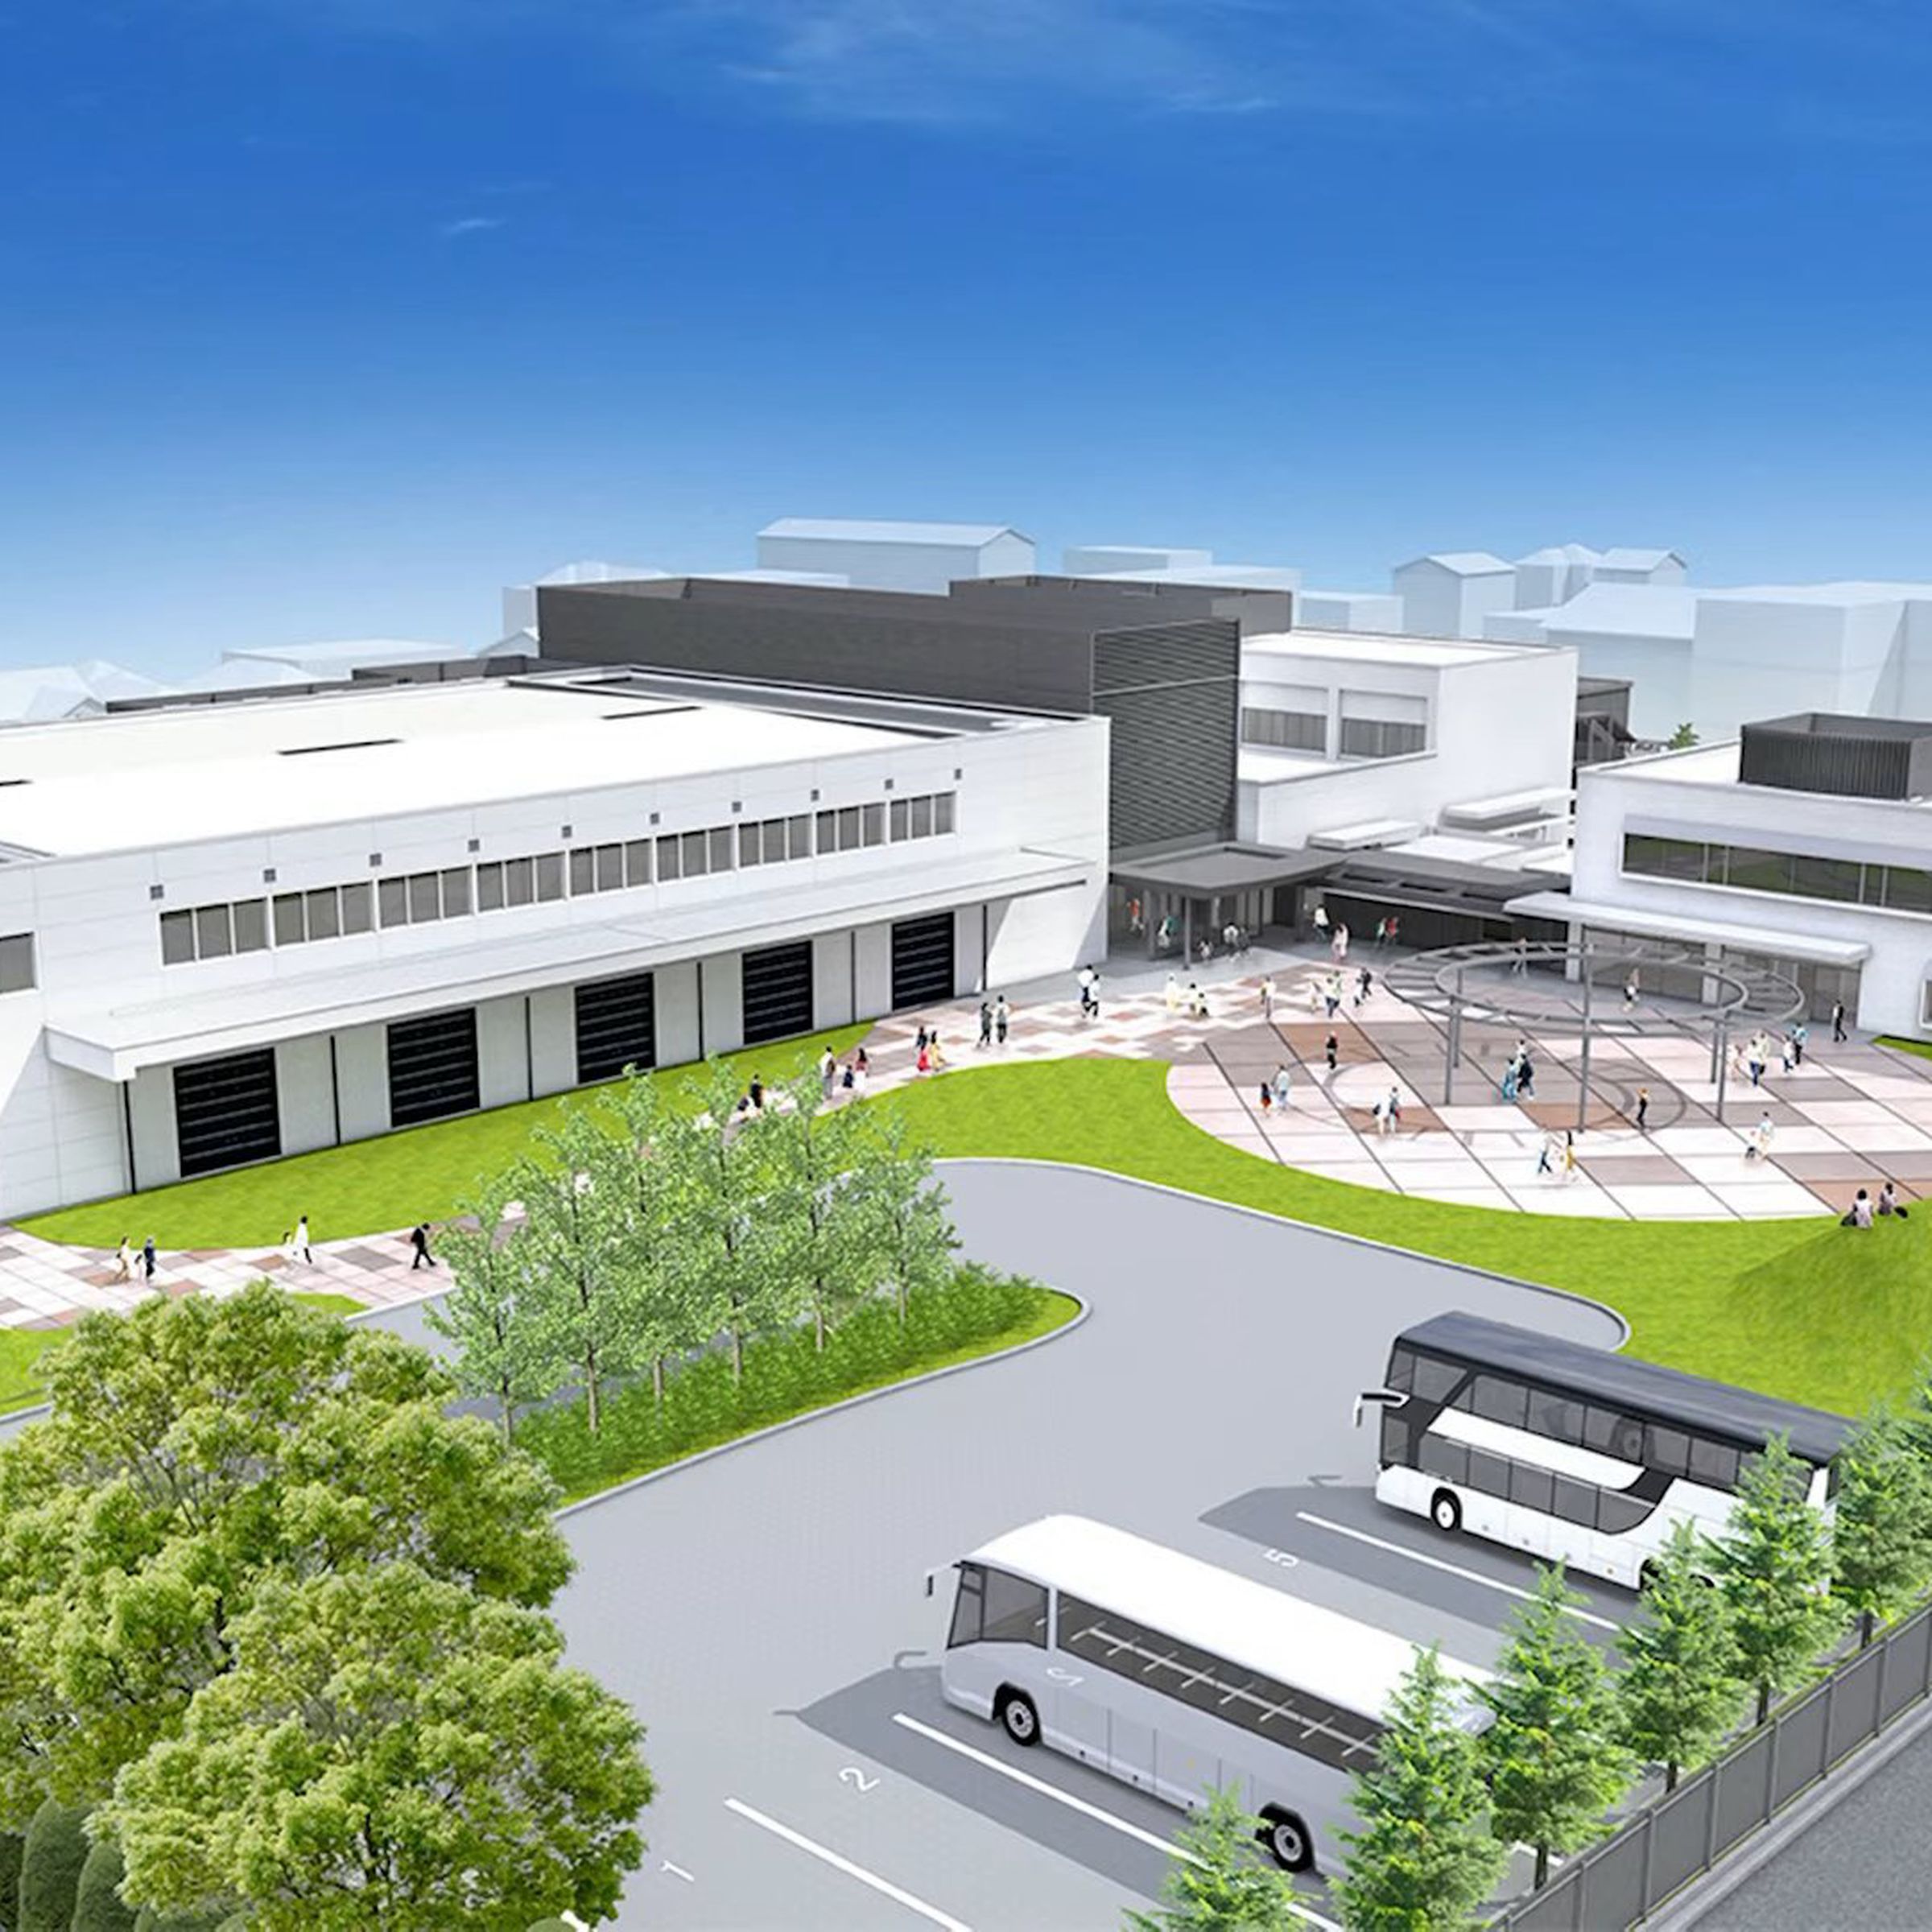 Rendered image of the Nintendo Museum buildings with tour buses and an open, park-like entrance.